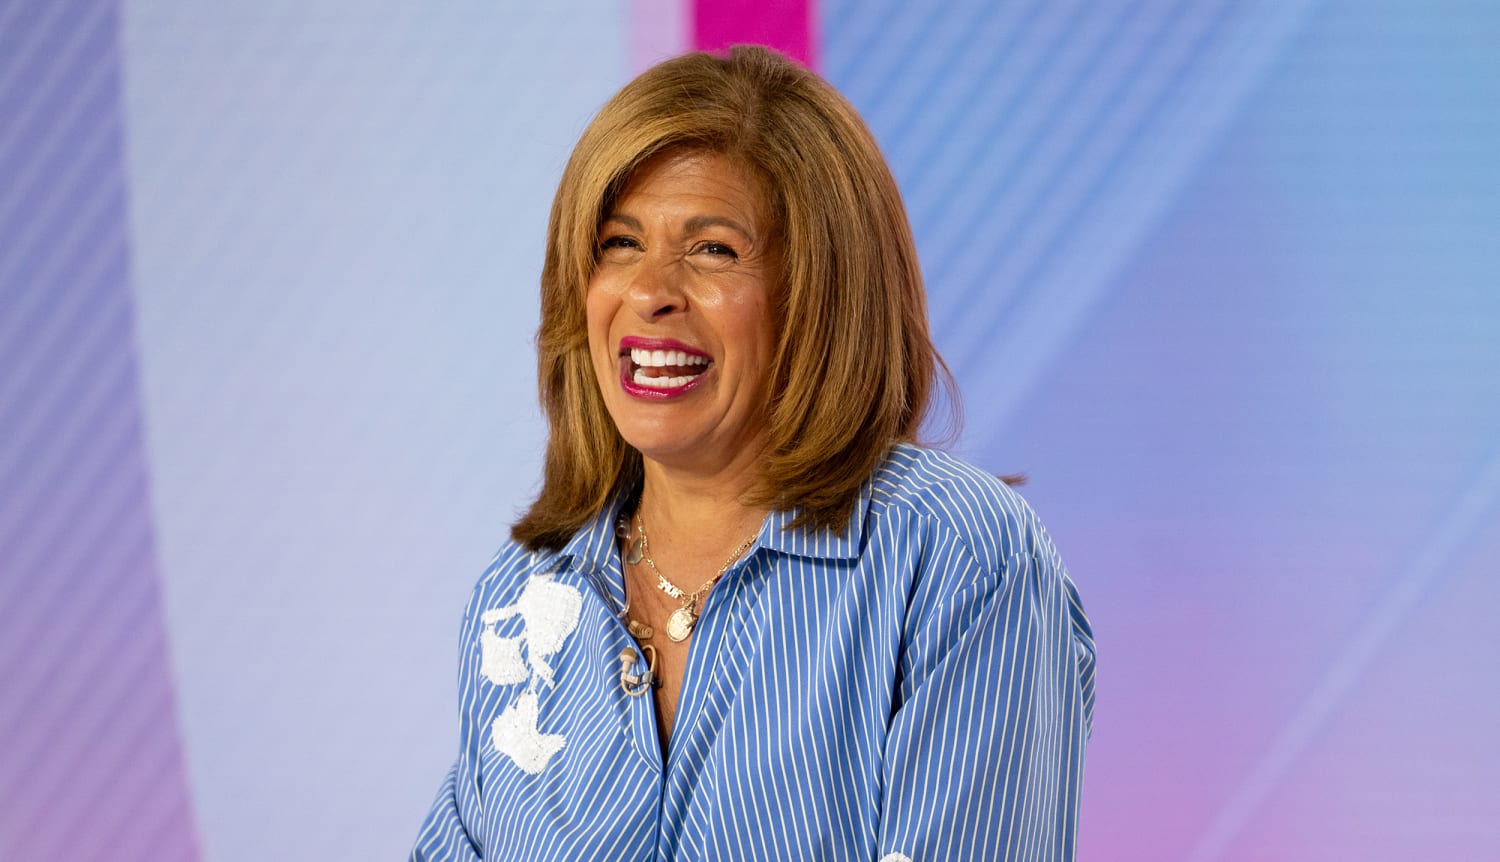 Hoda Kotb says she went skinny-dipping with her kids